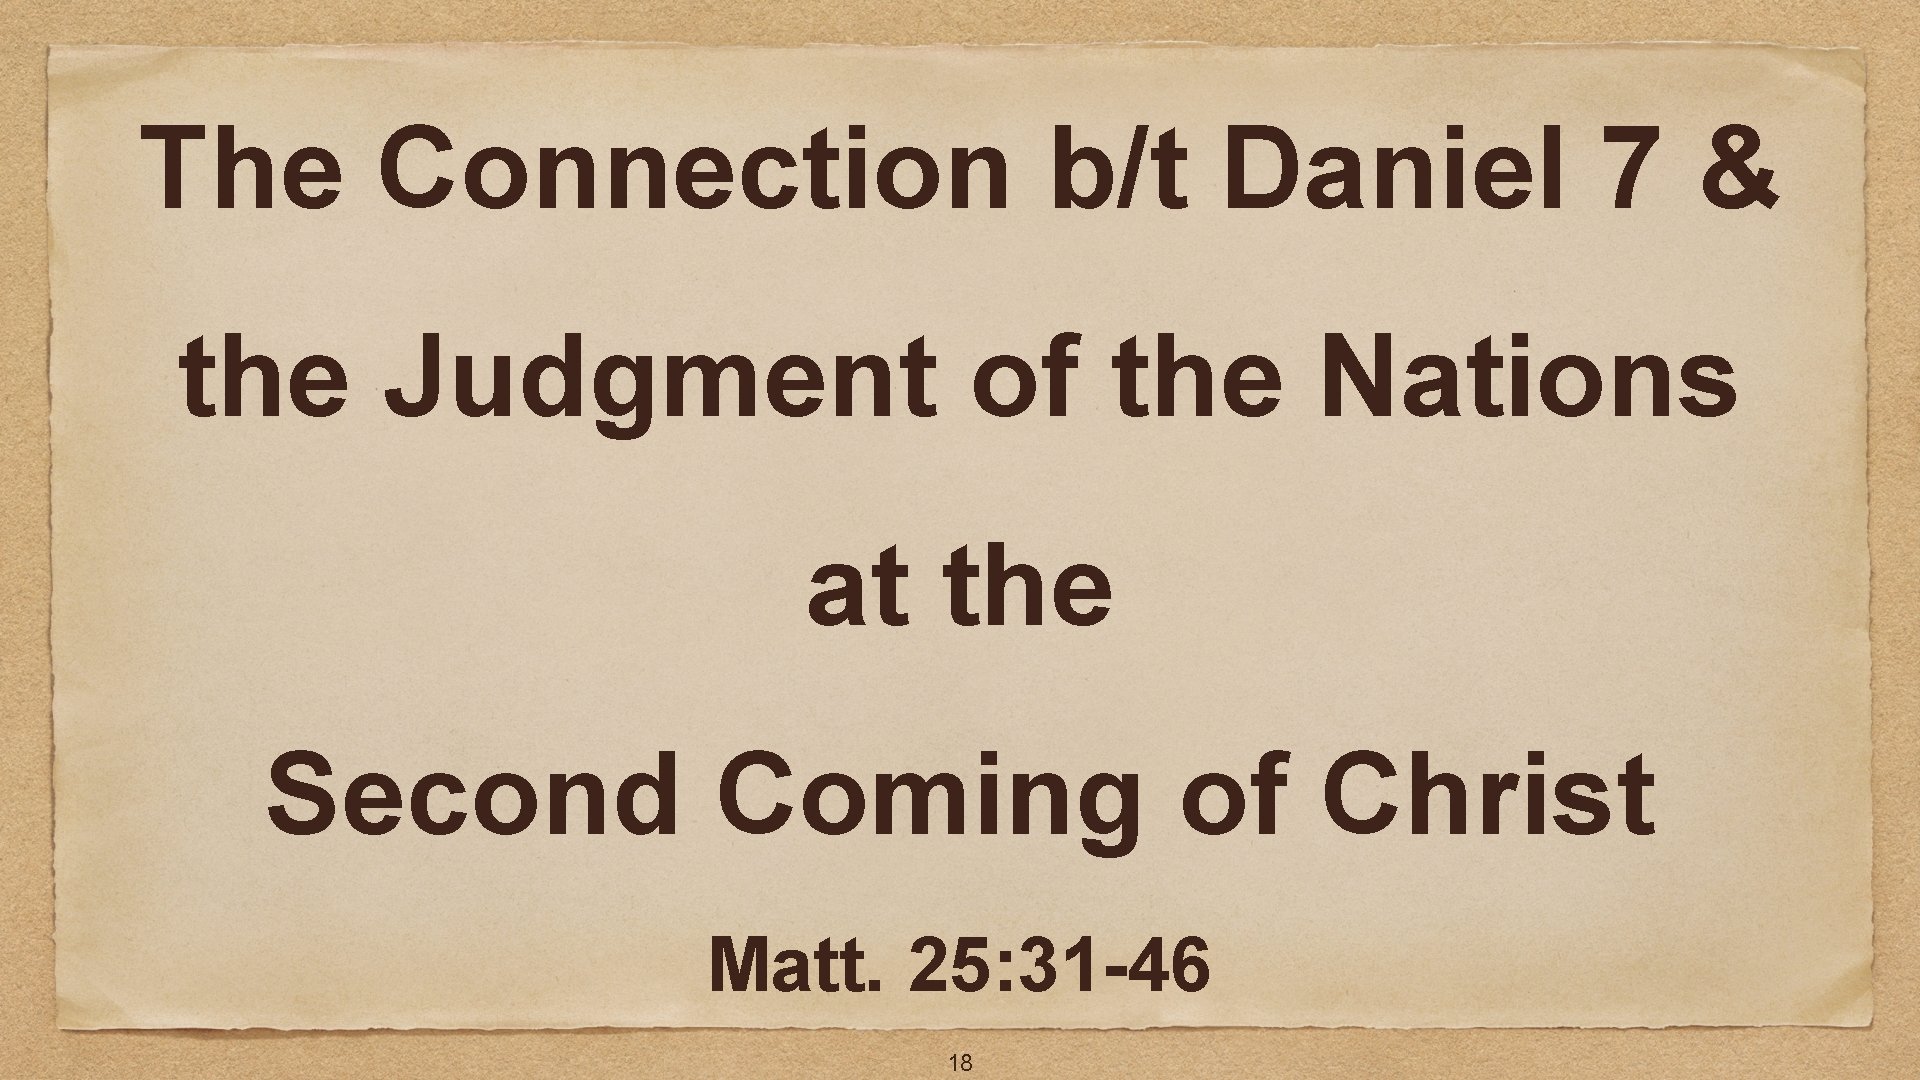 The Connection b/t Daniel 7 & the Judgment of the Nations at the Second